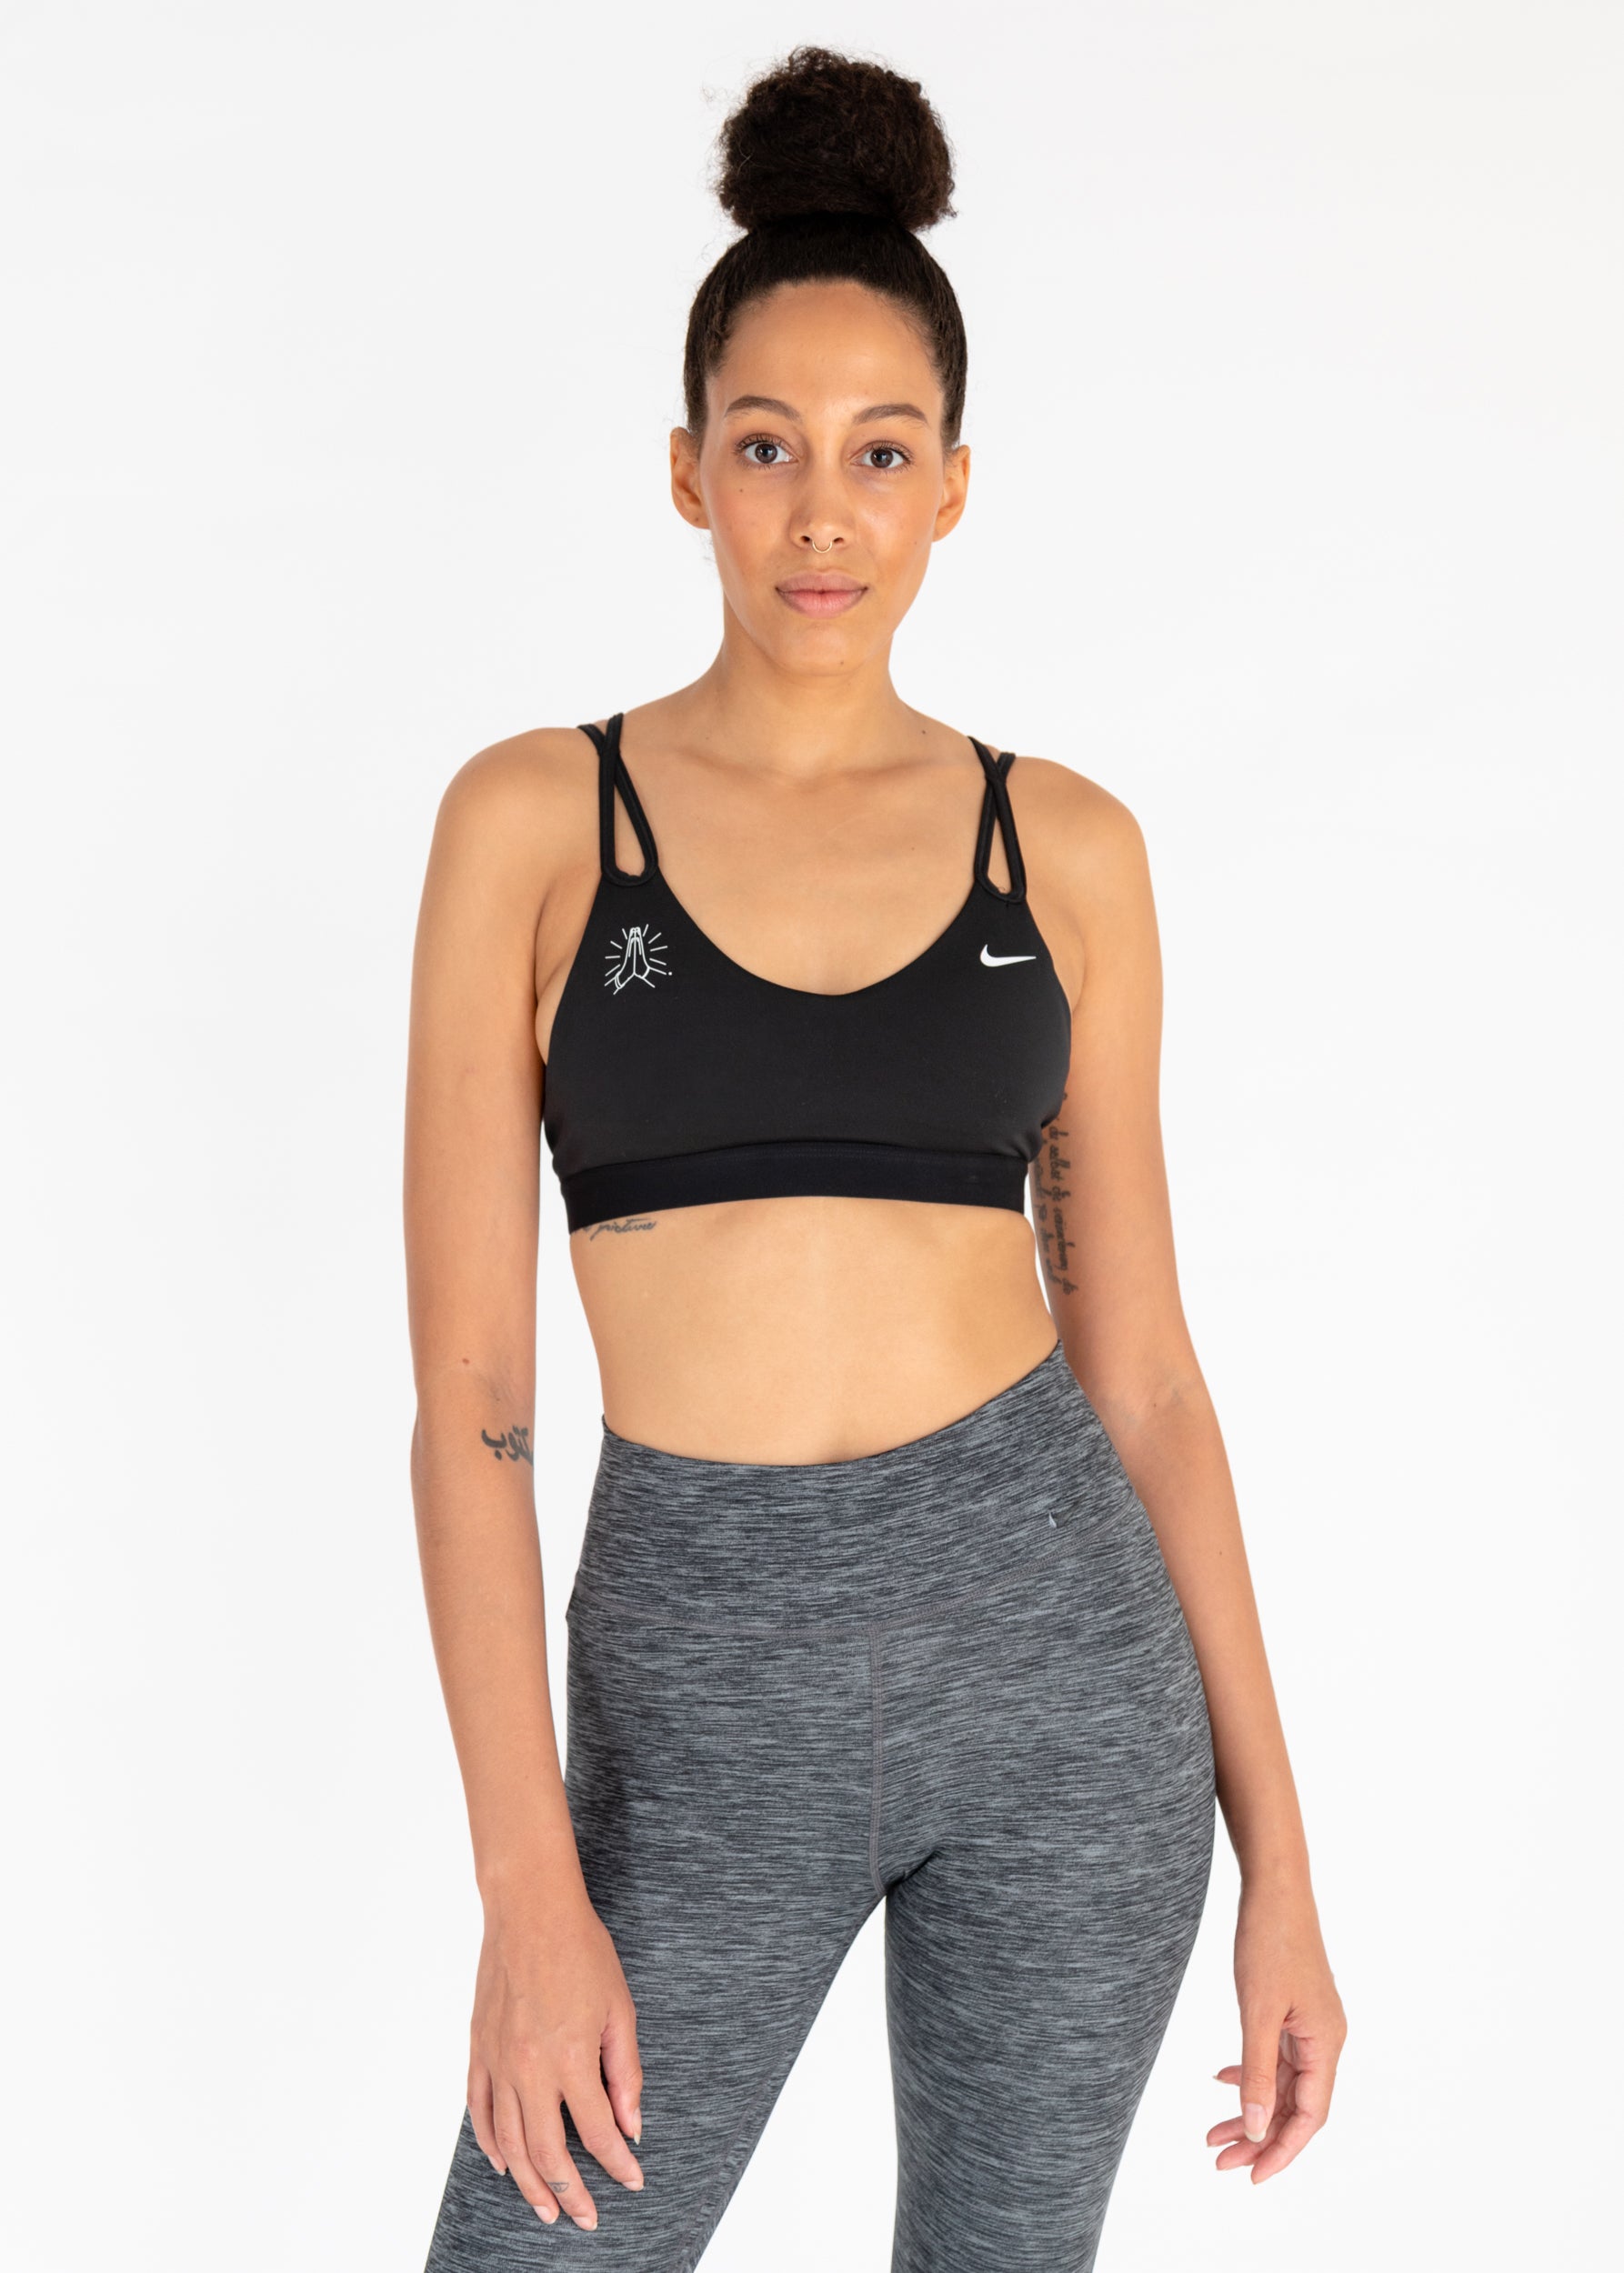 The Best Nike Sports Bras for Yoga . Nike BE